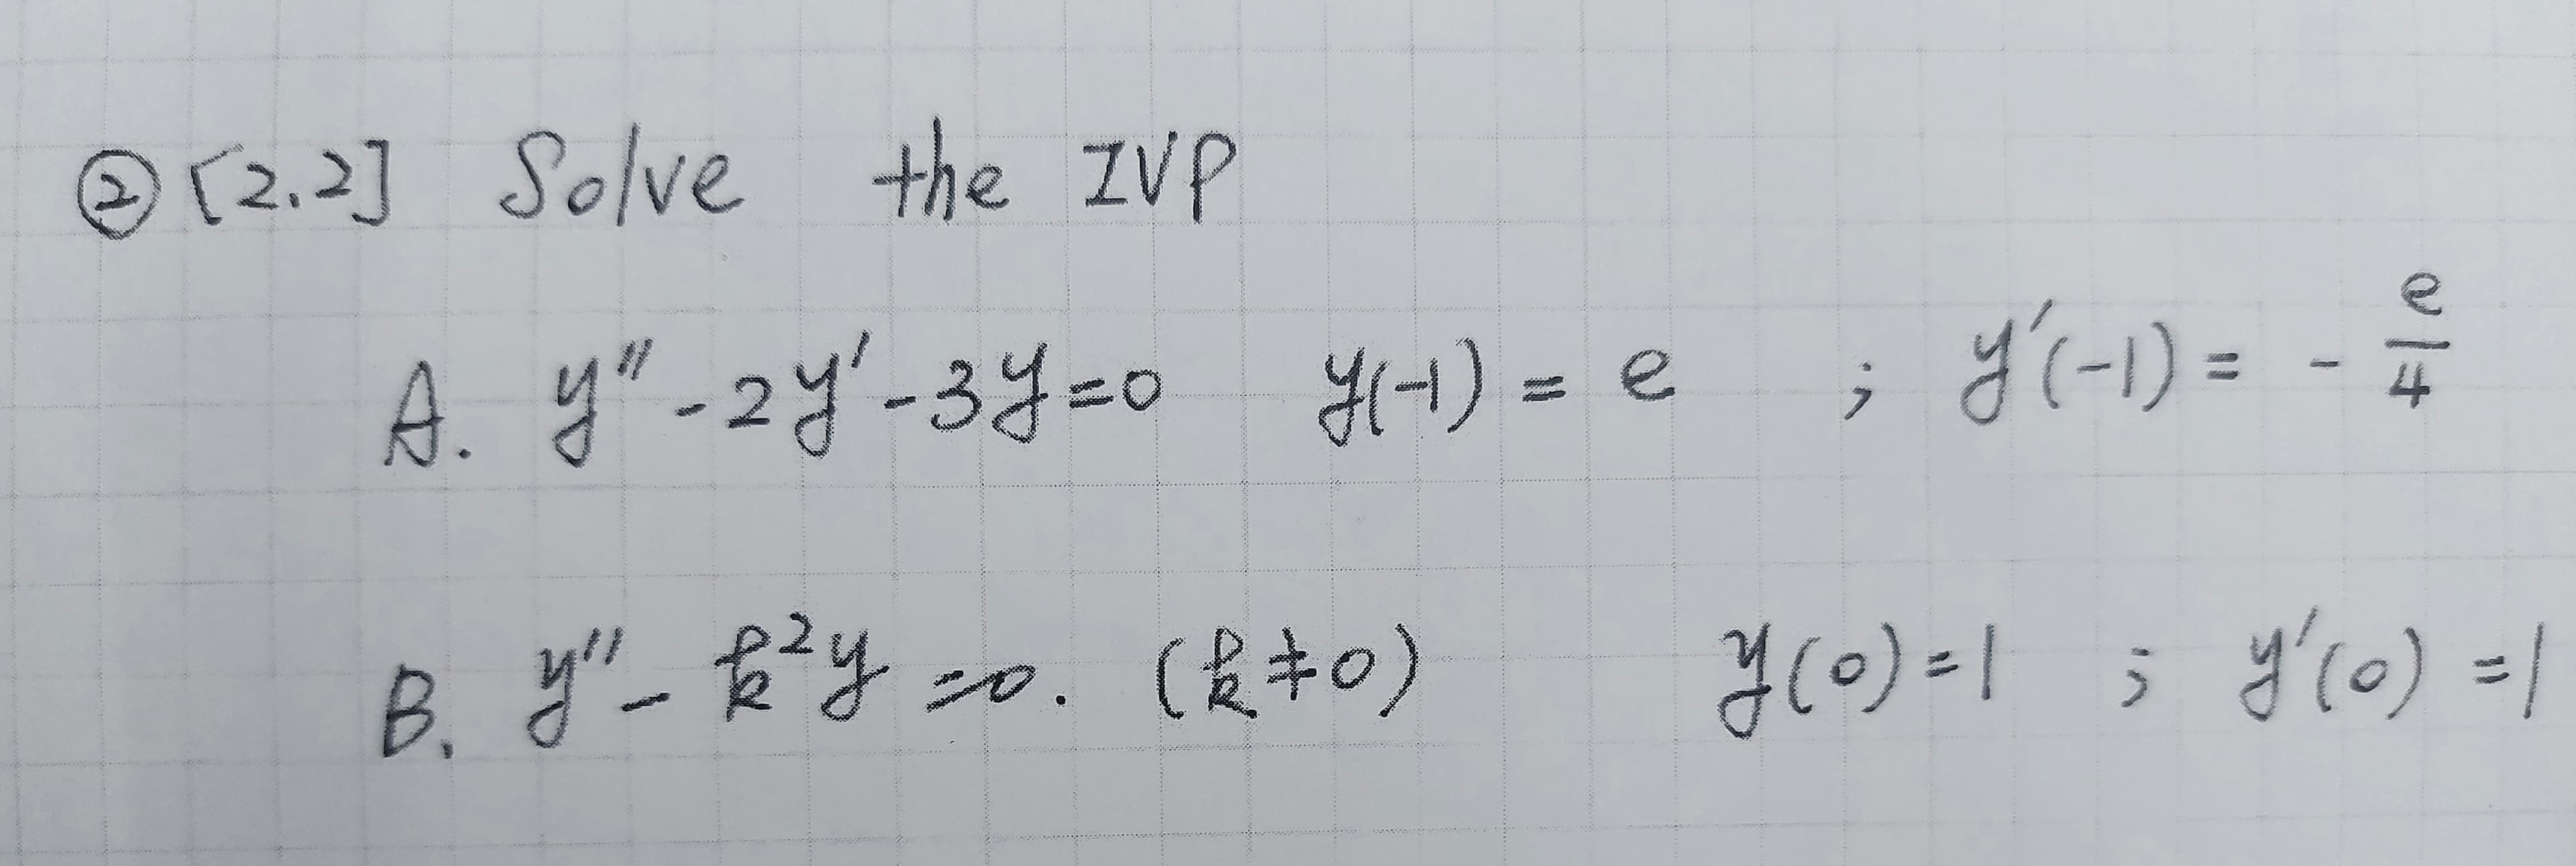 2,2]
e
he
IVP
e
(キ
11
in
(1)
2.
2.
ST
